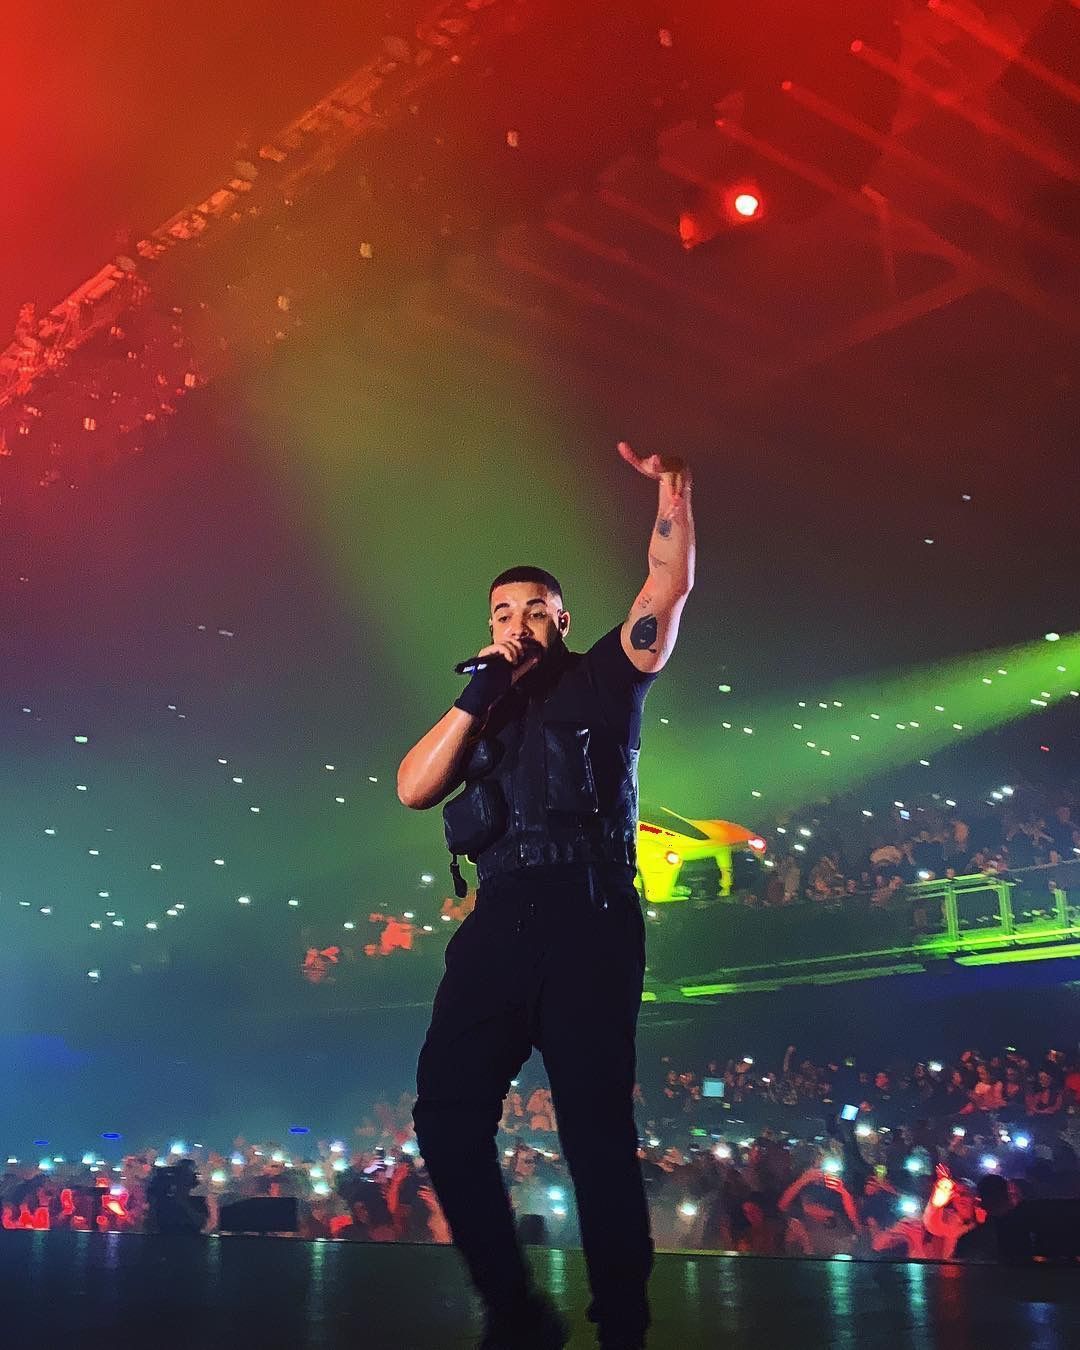 Drake on stage in a black vest and jeans holding a microphone - Drake